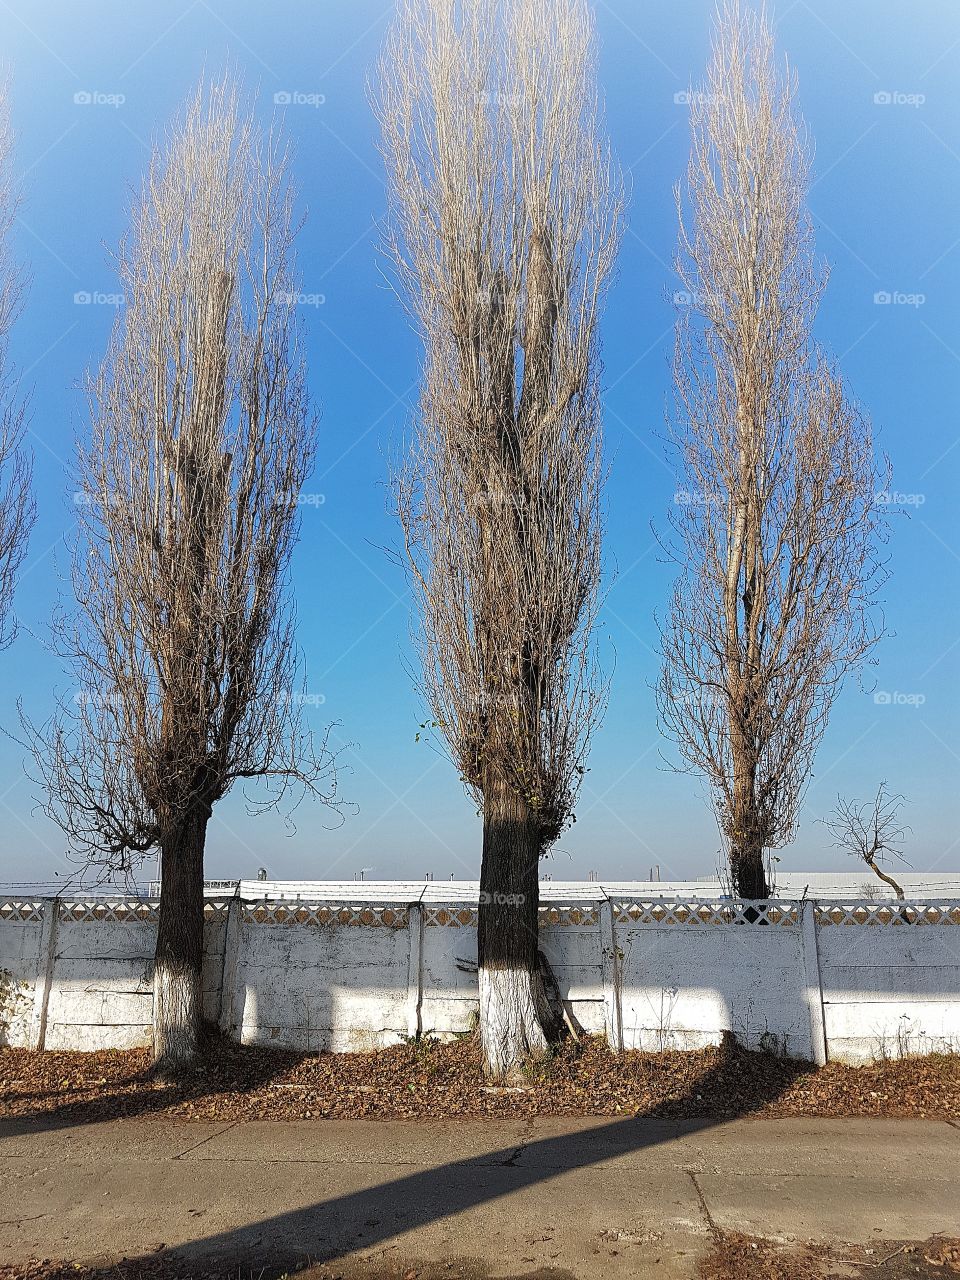 Trees in winter without snow